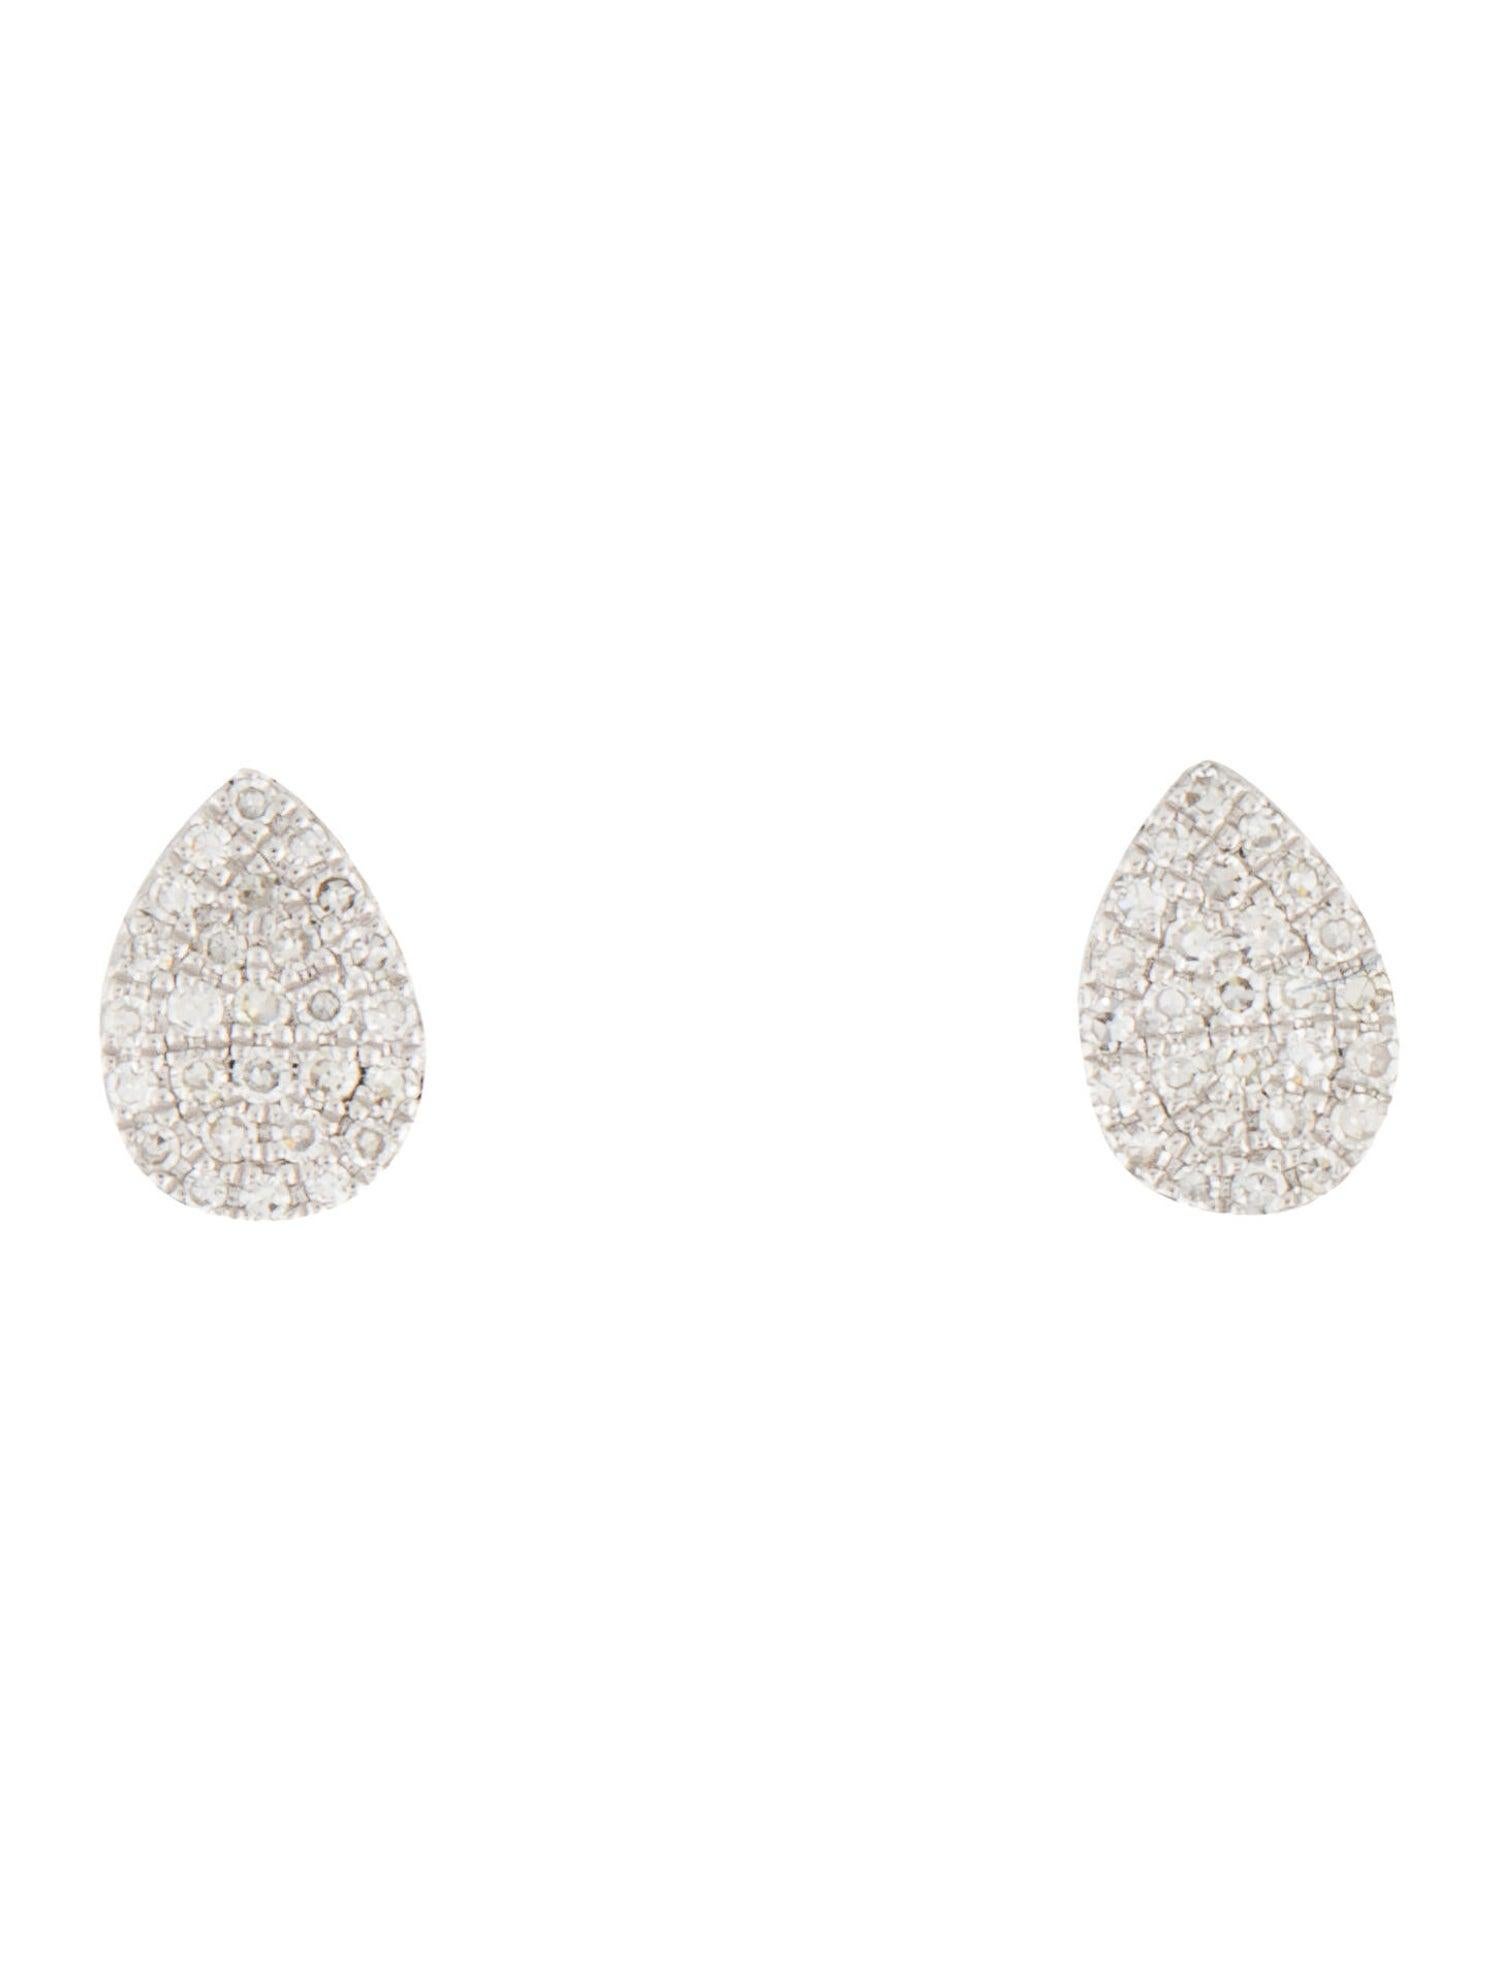 Quality Earrings Set: Made from real 14k gold and white sparkling diamonds approximately 0.18 ct. Certified diamonds, available in pink, white, and yellow, - Measurment 0.25